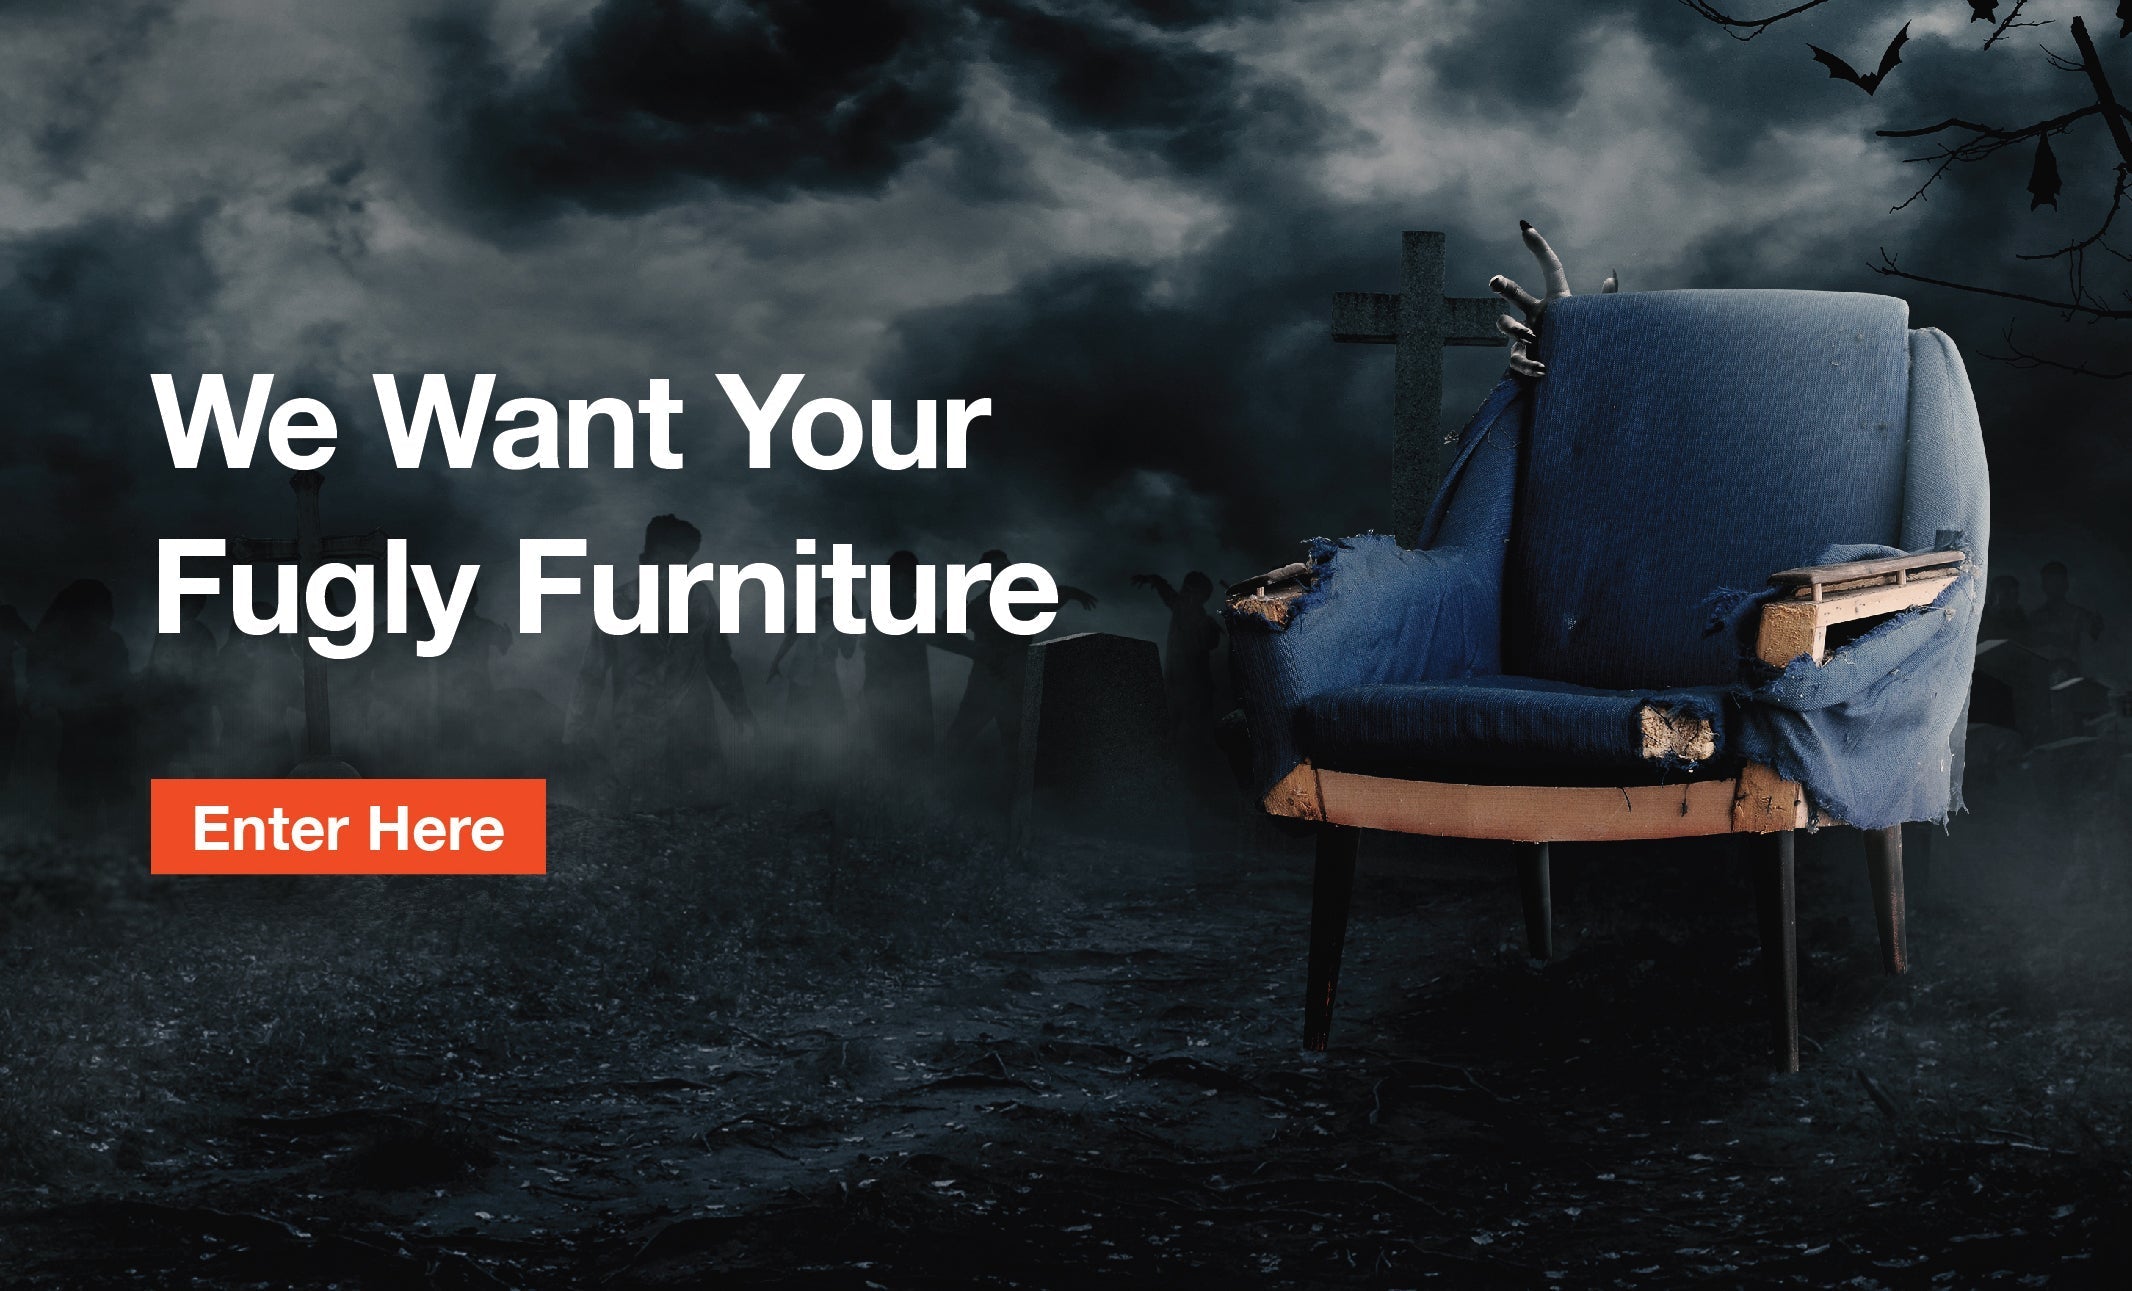 The Viral Fugly Furniture Contest